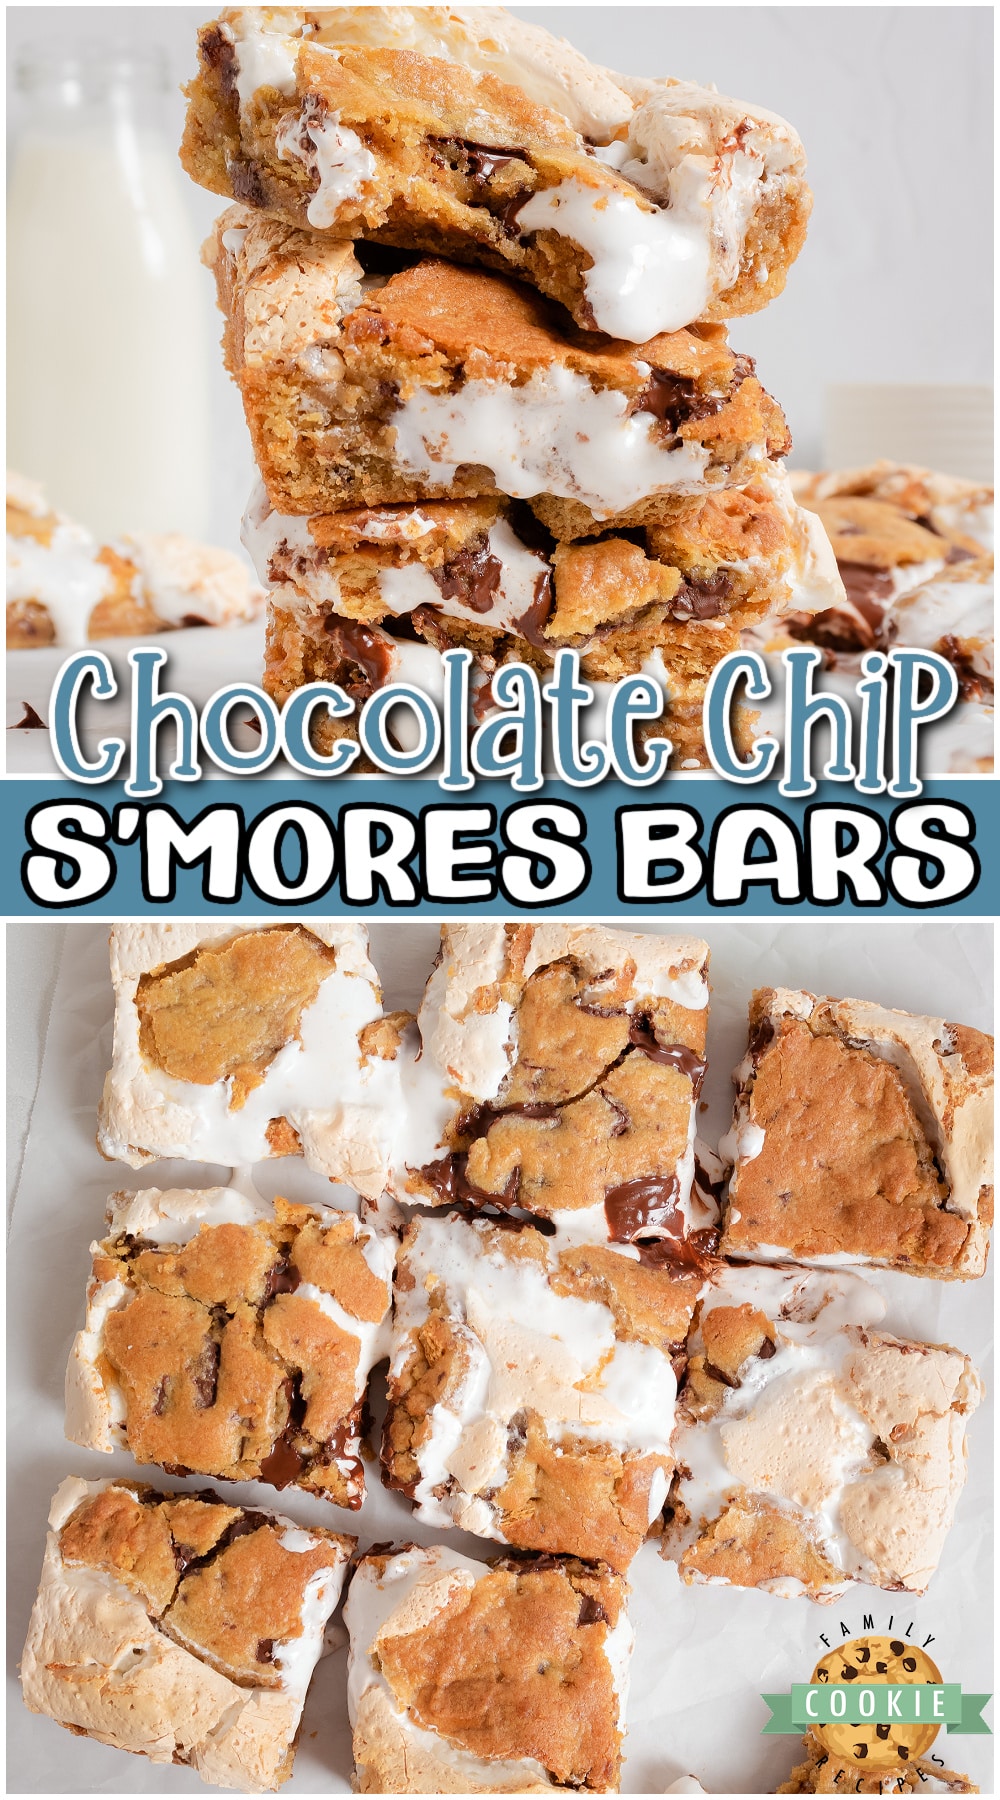 Smores Cookie Bars with chocolate chunks, graham cracker & marshmallow for a fun twist on a classic! Chocolate Chip cookies + s'mores in a delicious dessert bar everyone loves!  via @buttergirls